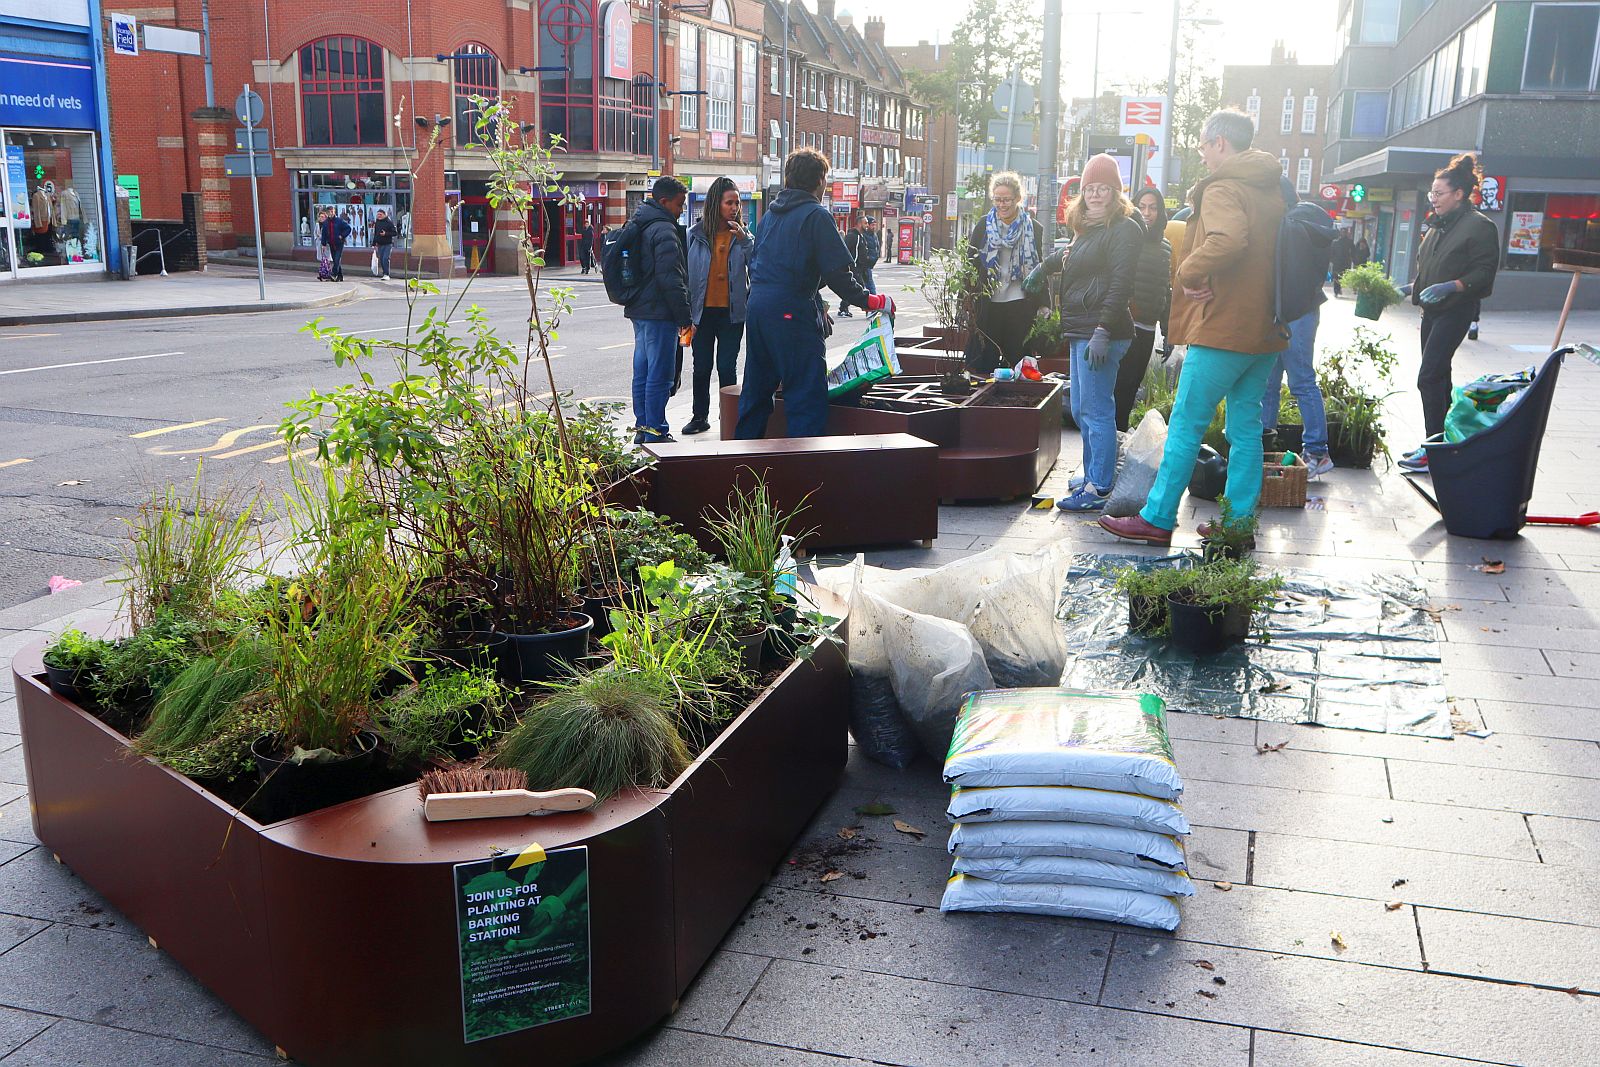 Group of volunteers filling new planters outside Barking station